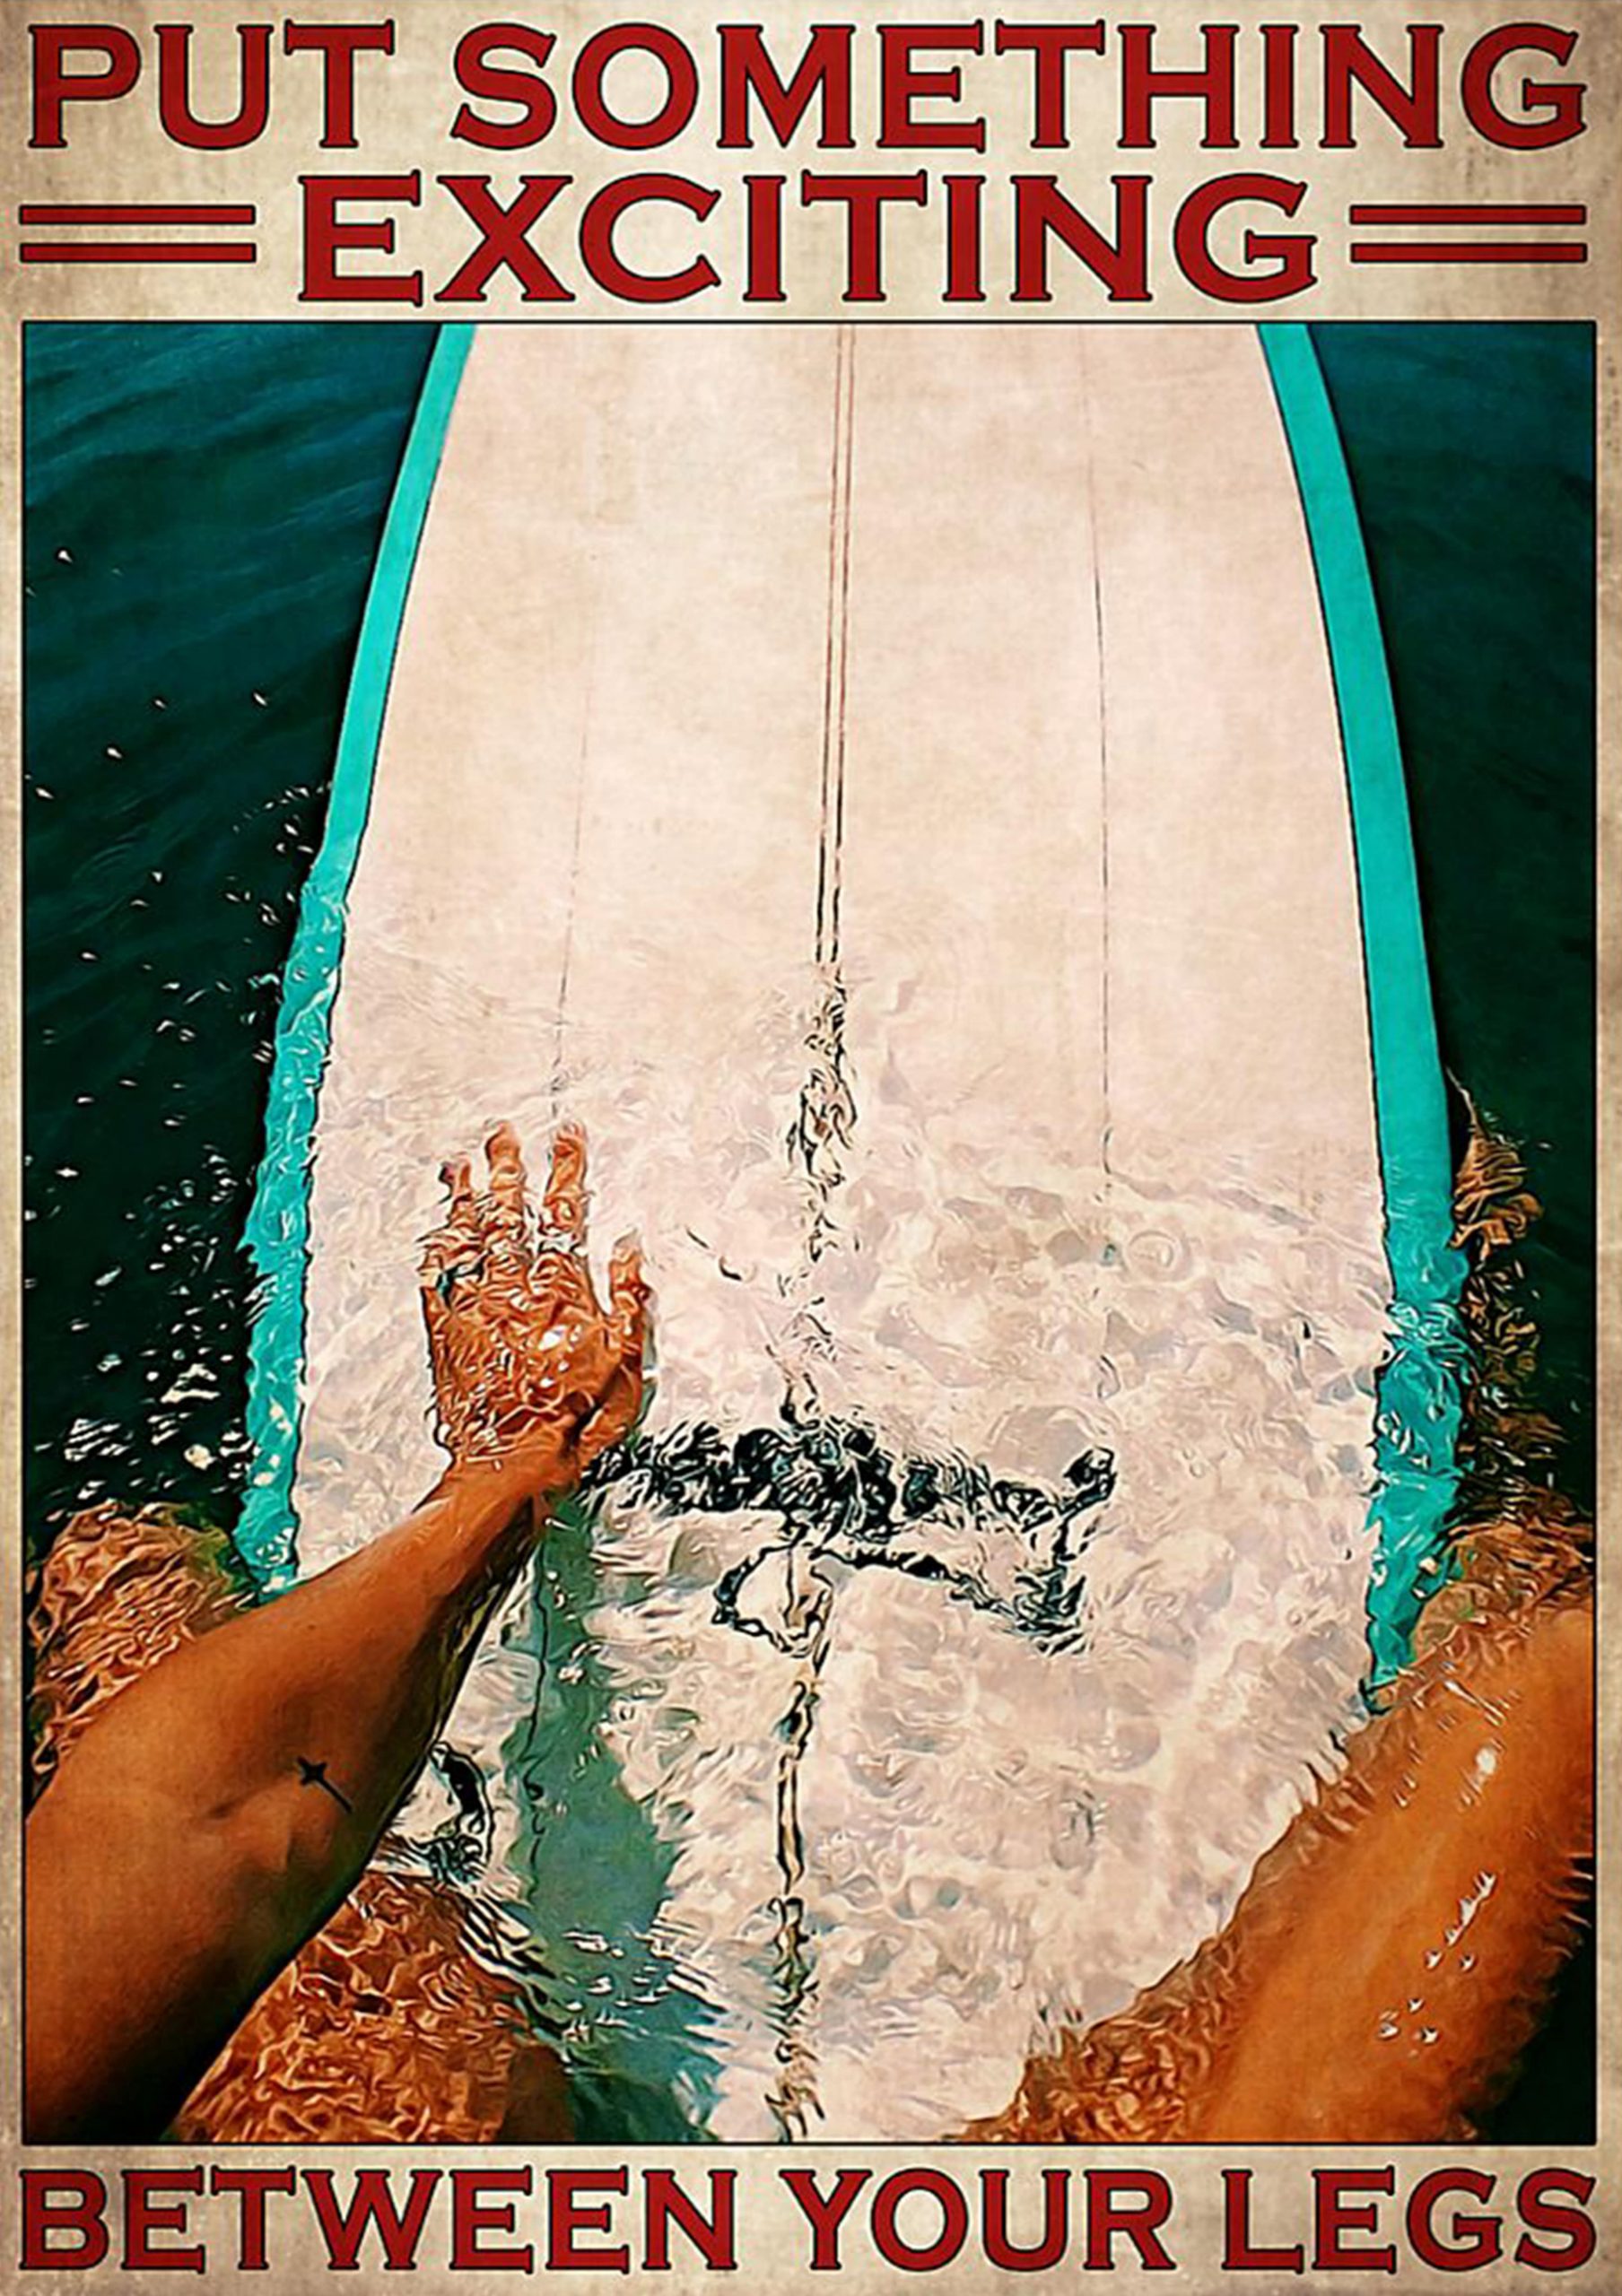 vintage surfing put something exciting between your legs poster 1